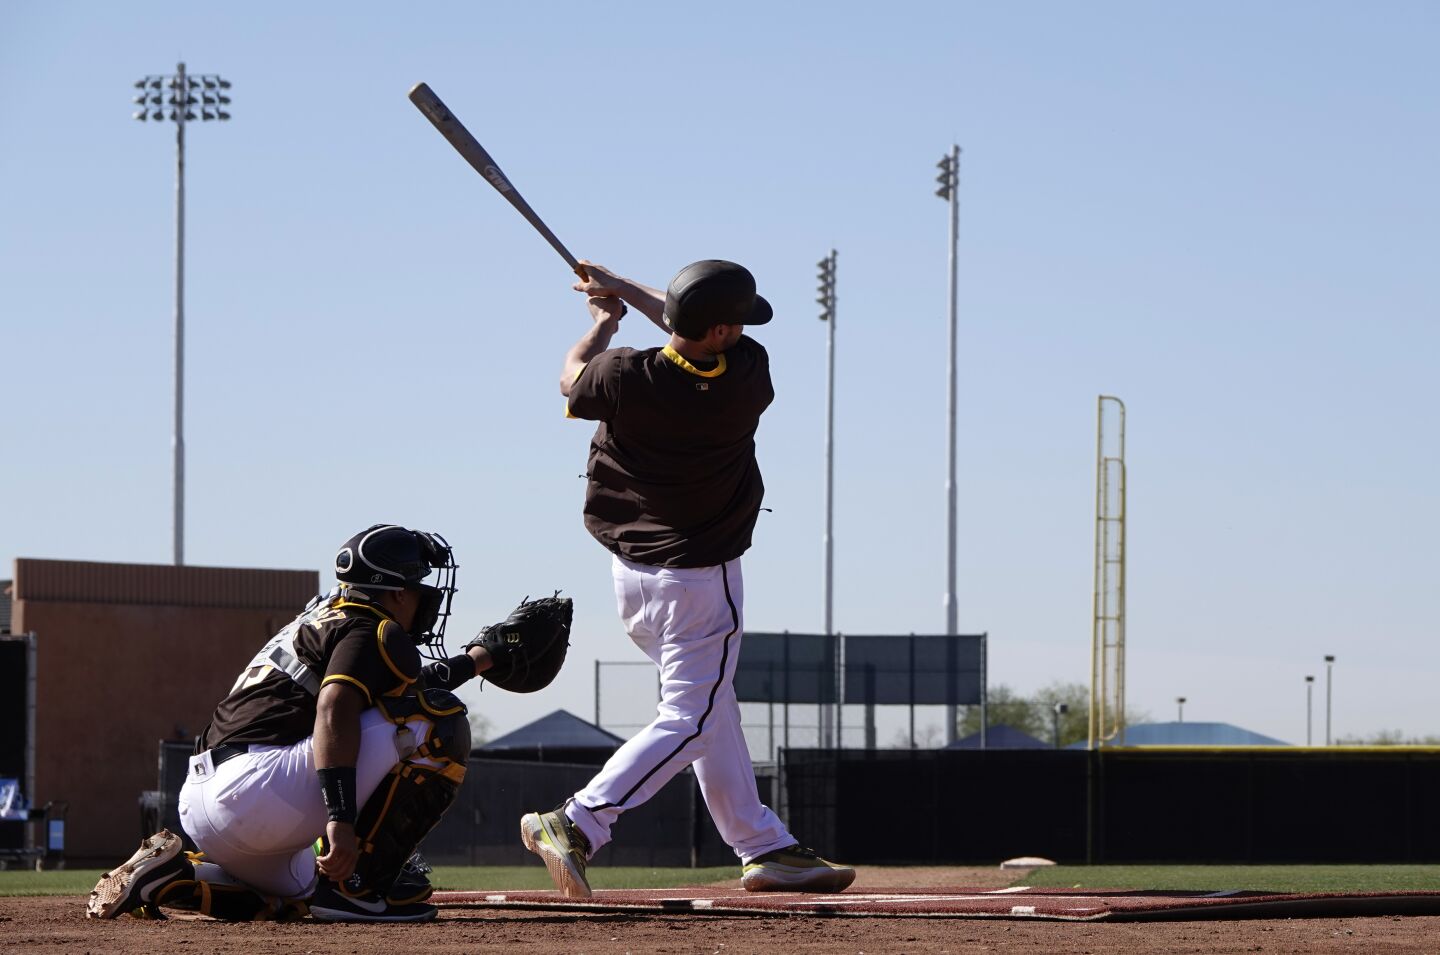 San Diego Padres Wil Myers bats during a spring training practice on Feb. 20, 2020.